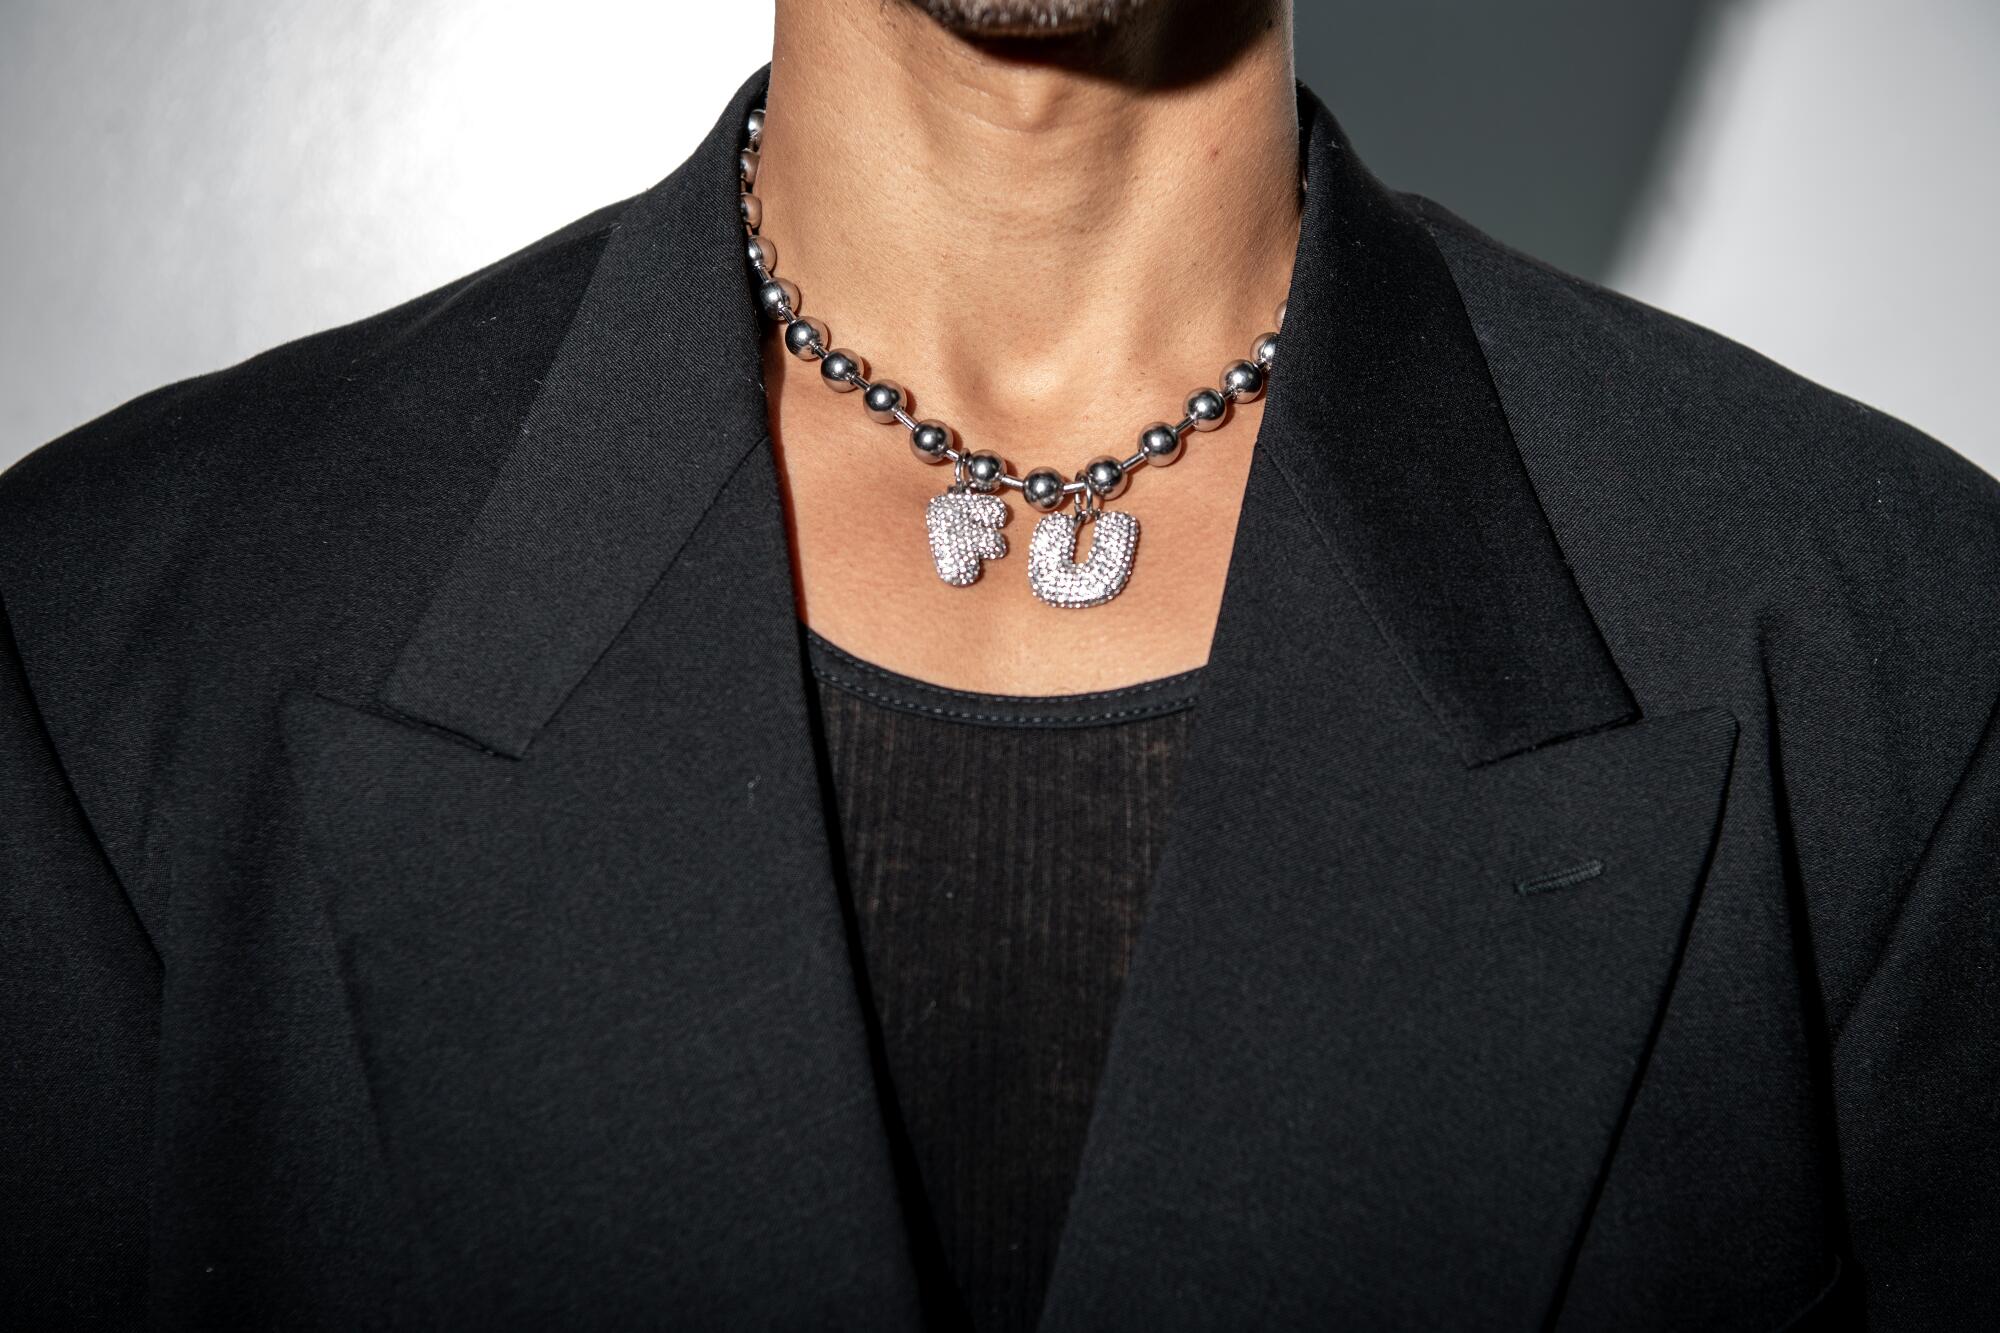 A close-up shot of a man wearing a necklace with the letters "F" and "U."